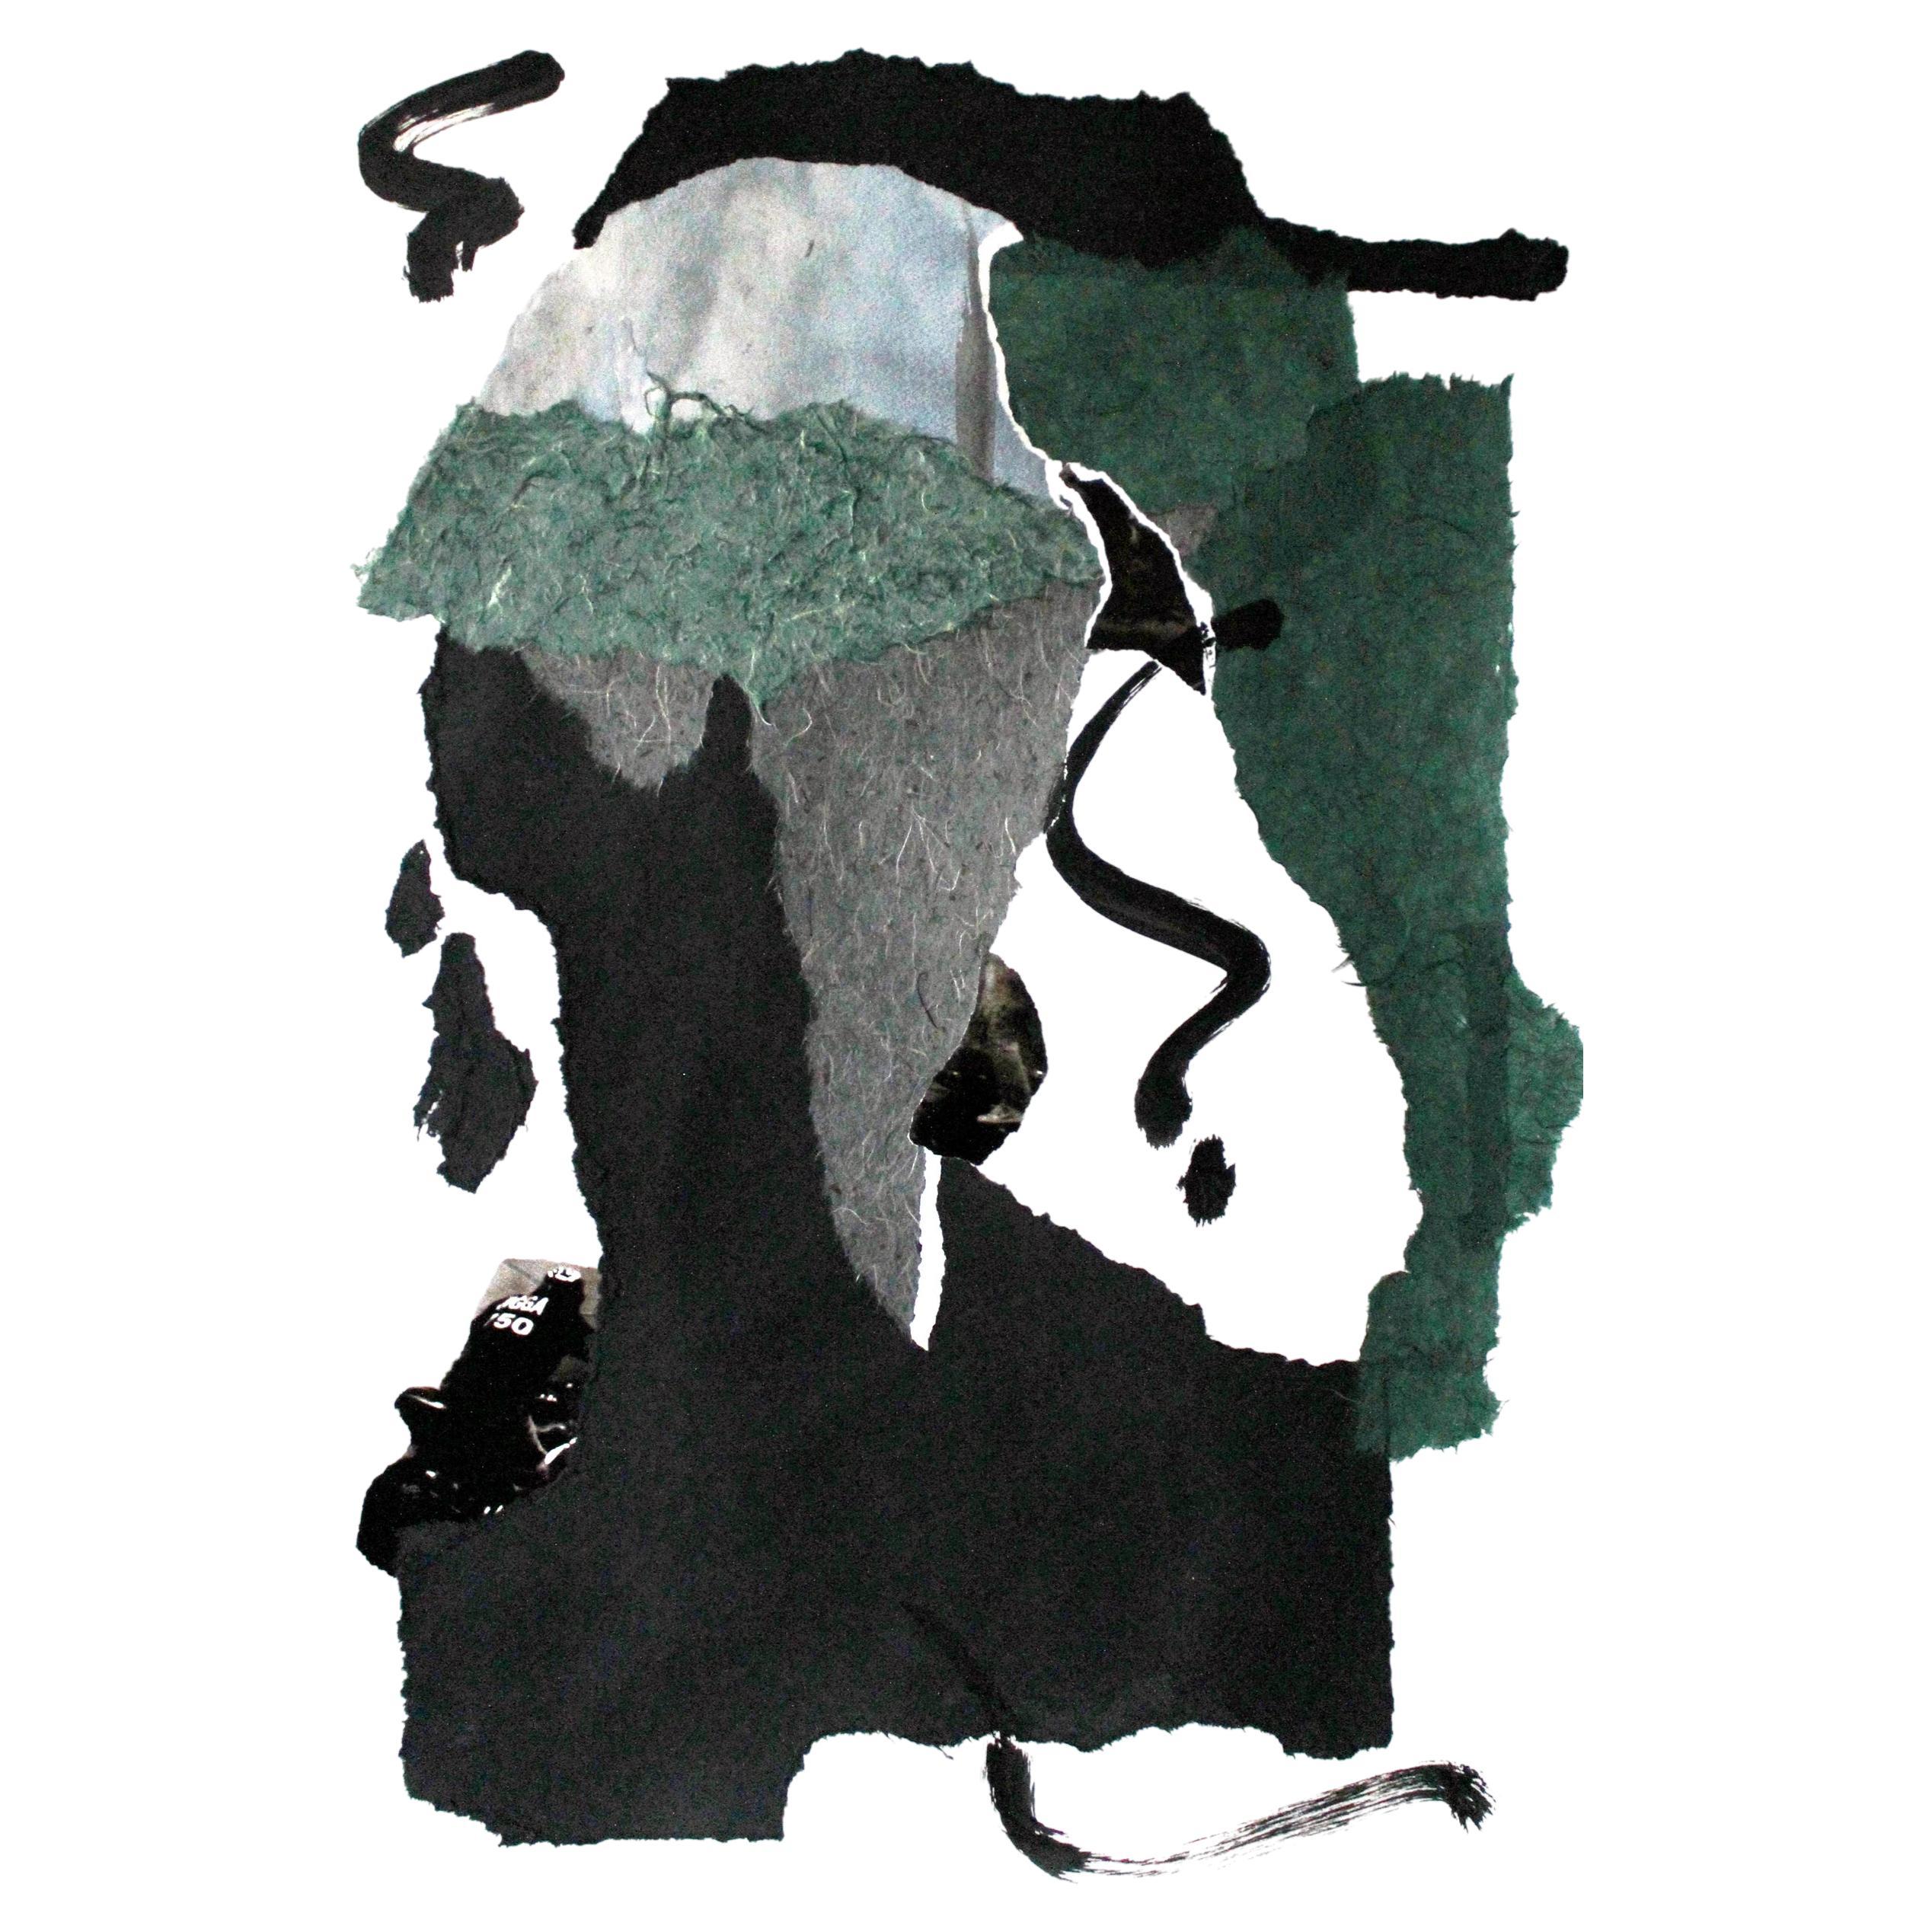 "Contemplation, " 2022 A Large Black, Gray & Green Abstract Collage By Diane Love